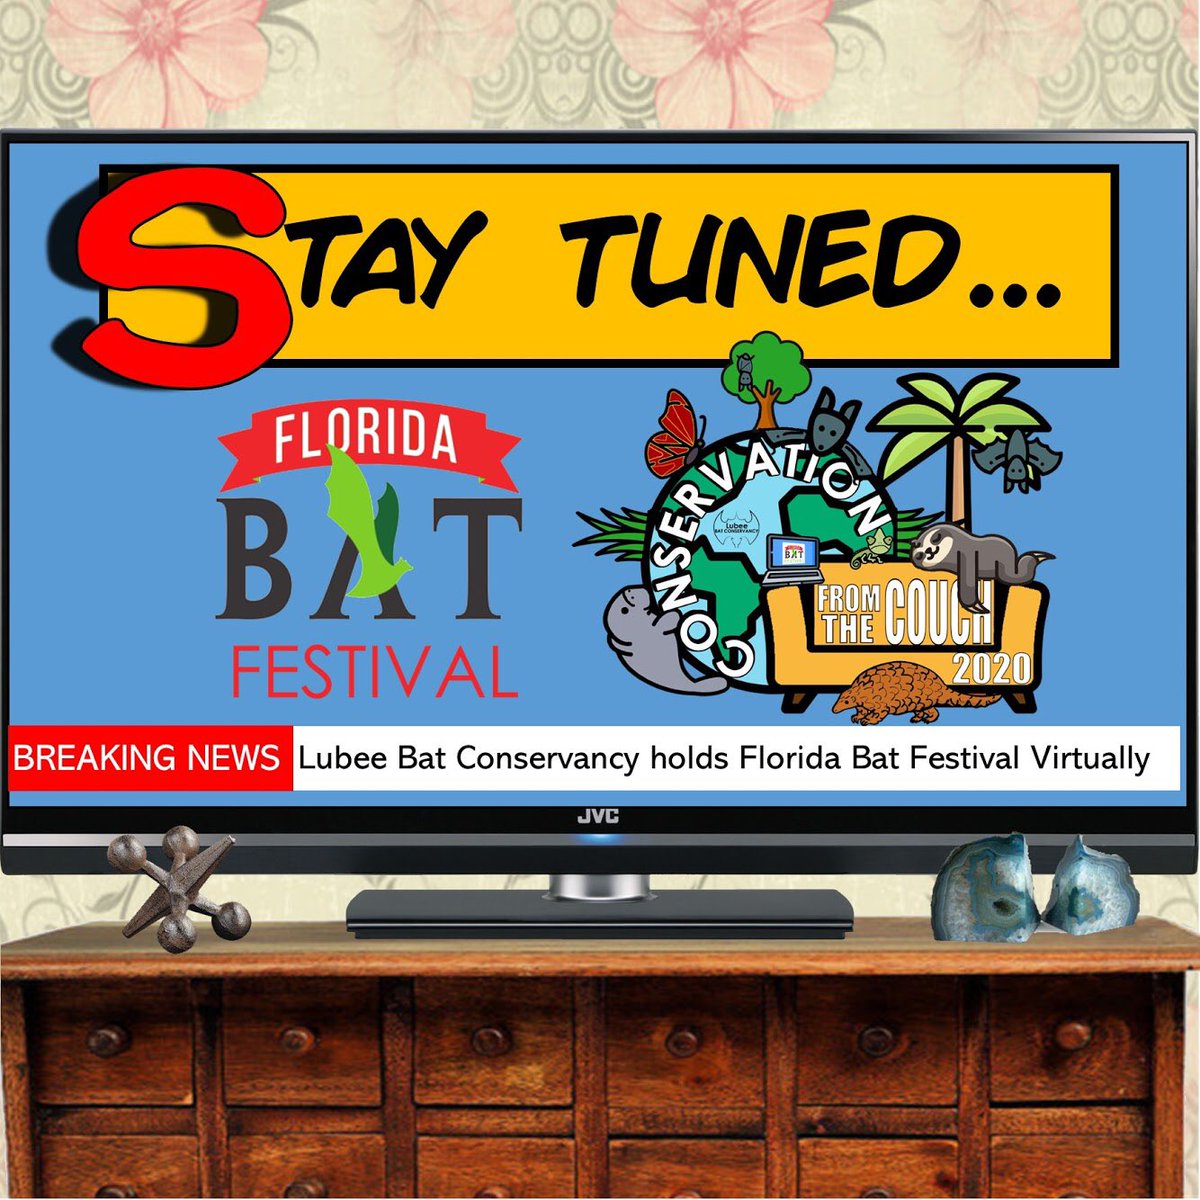 Bat Fest is NOT cancelled this year! We are not hosting the festival on Lubee grounds due to safety. Instead- an awesome virtual experience and community-based activities planned for the week of October 18th! Get ready! #BatFest #FloridaBatFest #ConservationFromTheCouch